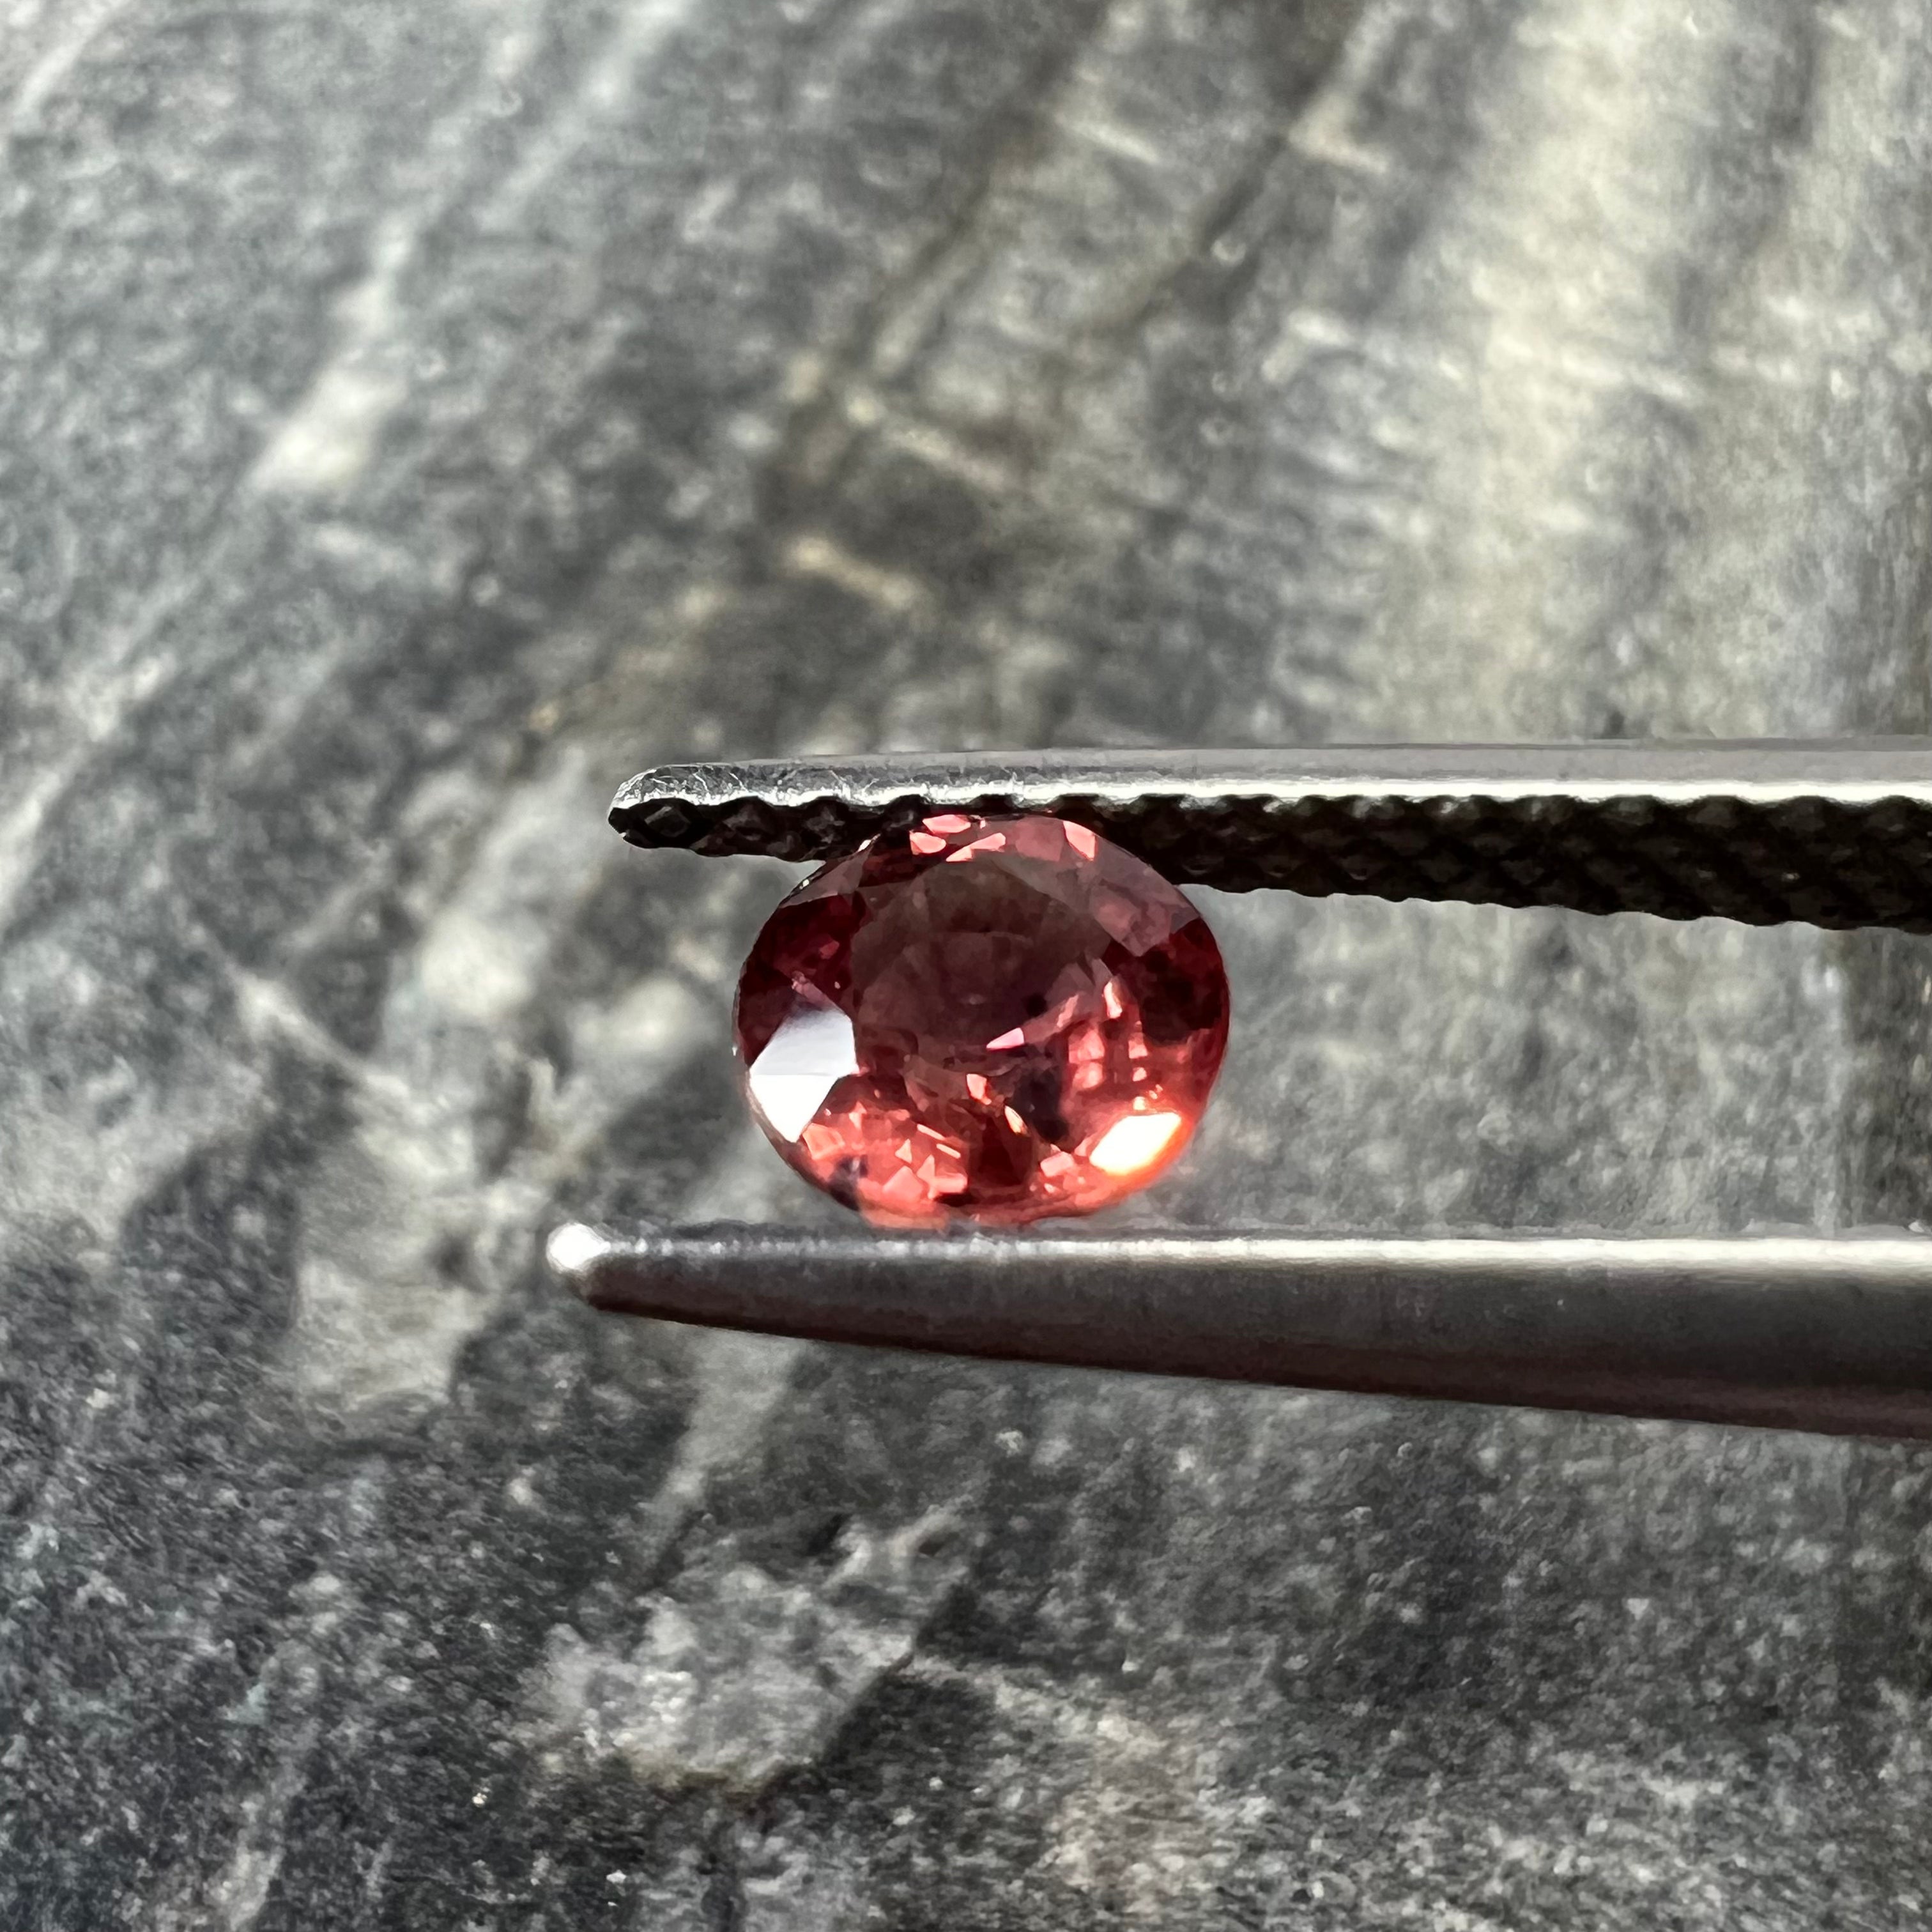 .60CT Loose Round Red Sapphire 4.84x3.03mm Earth mined Gemstone